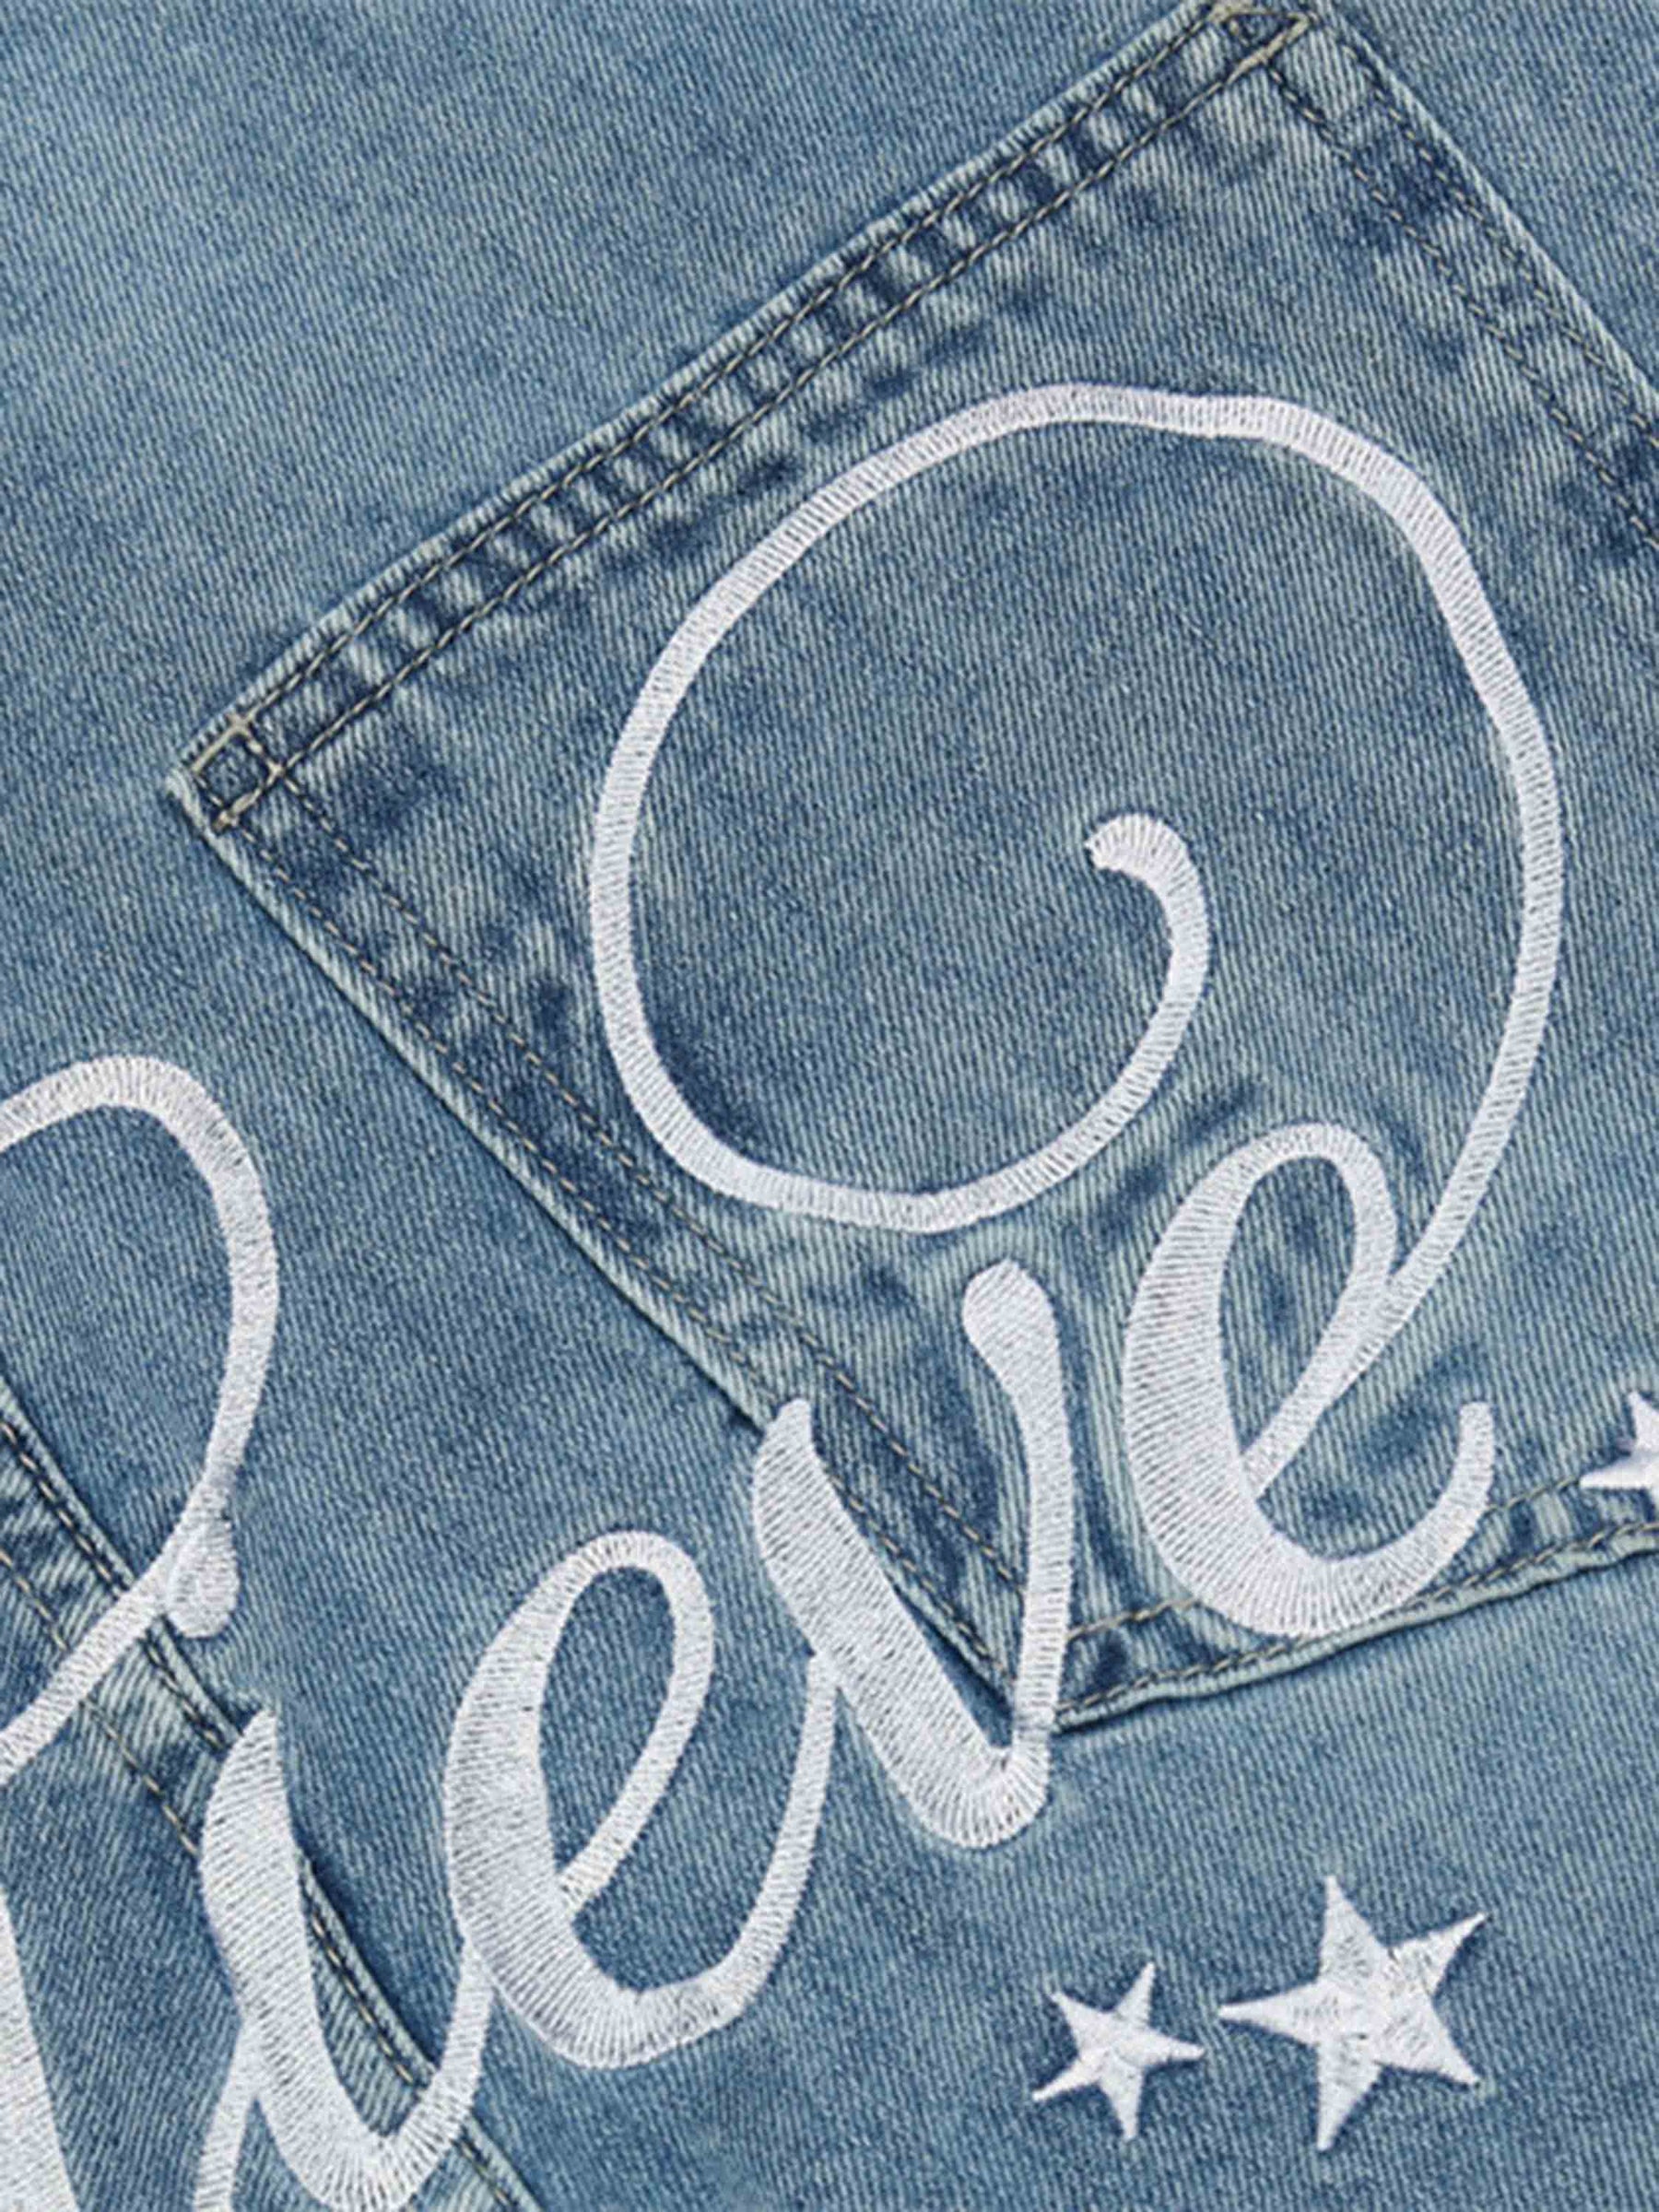 LUXENFY™ - Lettered Embroidery Wash To Make Worn Jeans And Slacks luxenfy.com